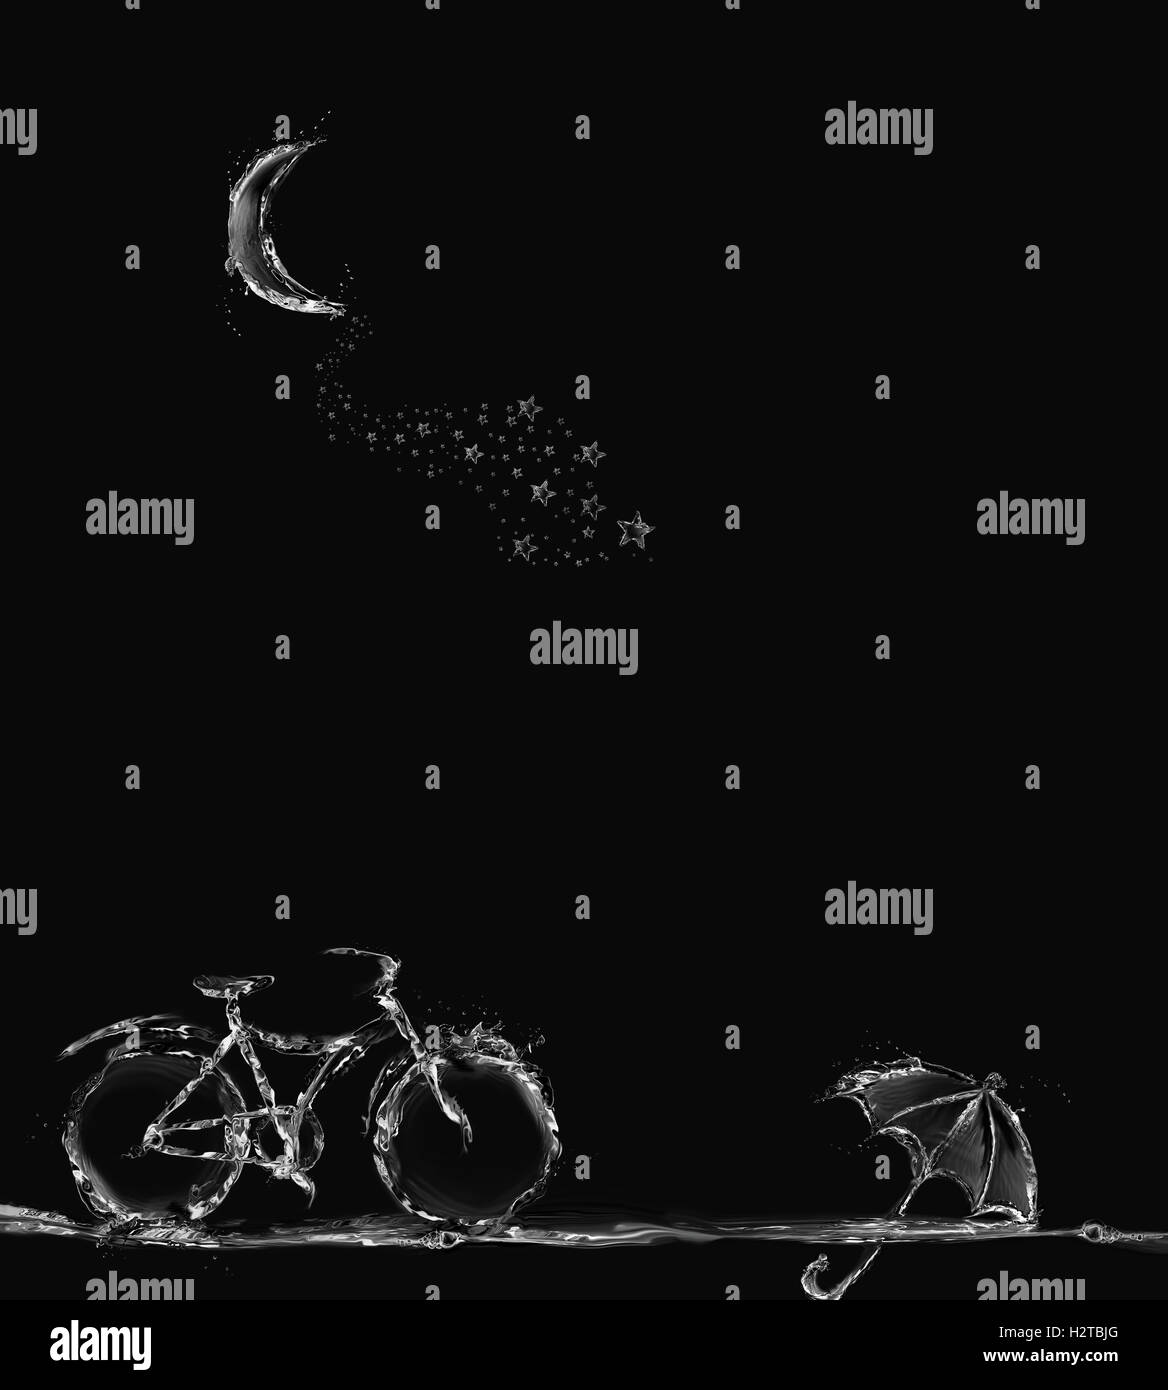 A magical scene with a bicycle, umbrella, and crescent with a star trail. Stock Photo